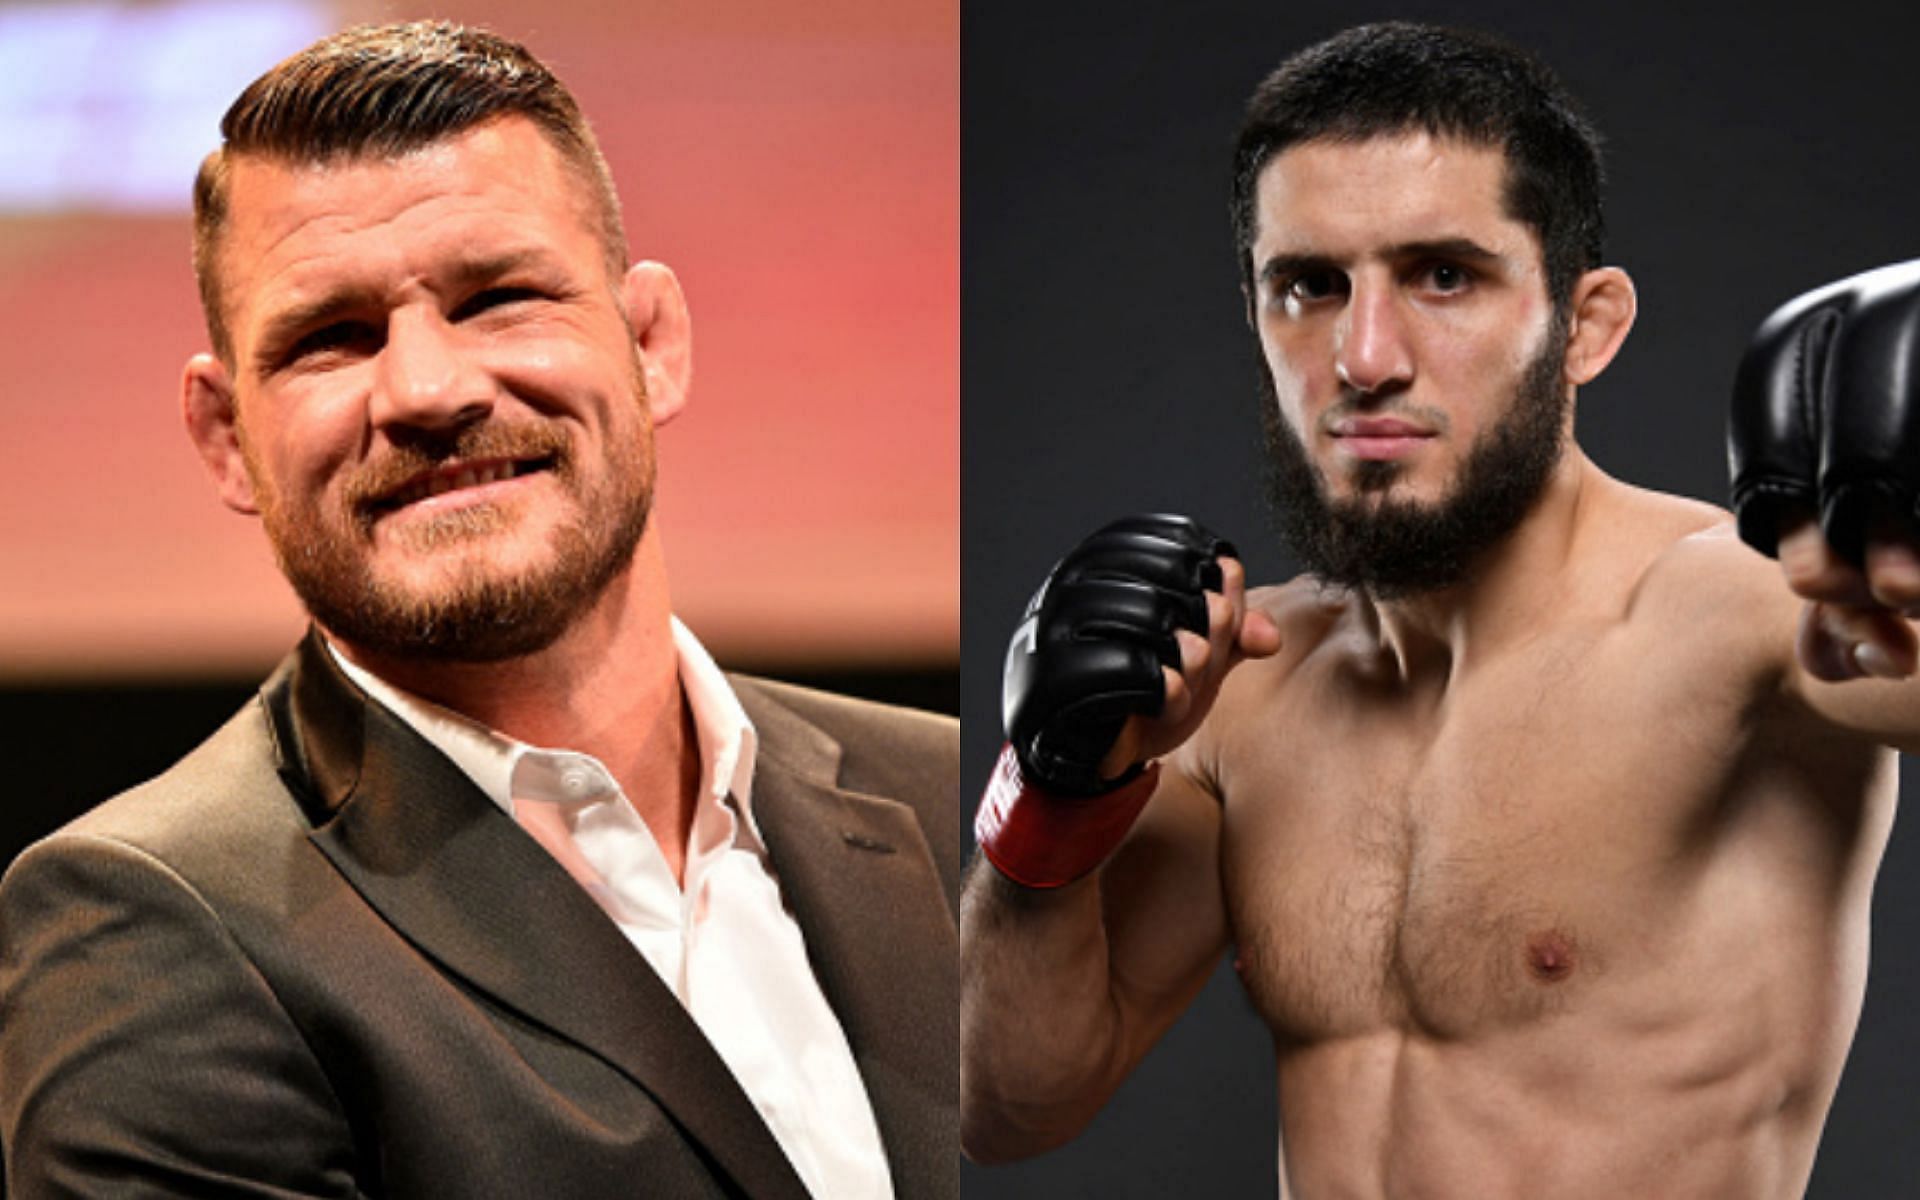 Michael Bisping (left) and Islam Makhachev (right)